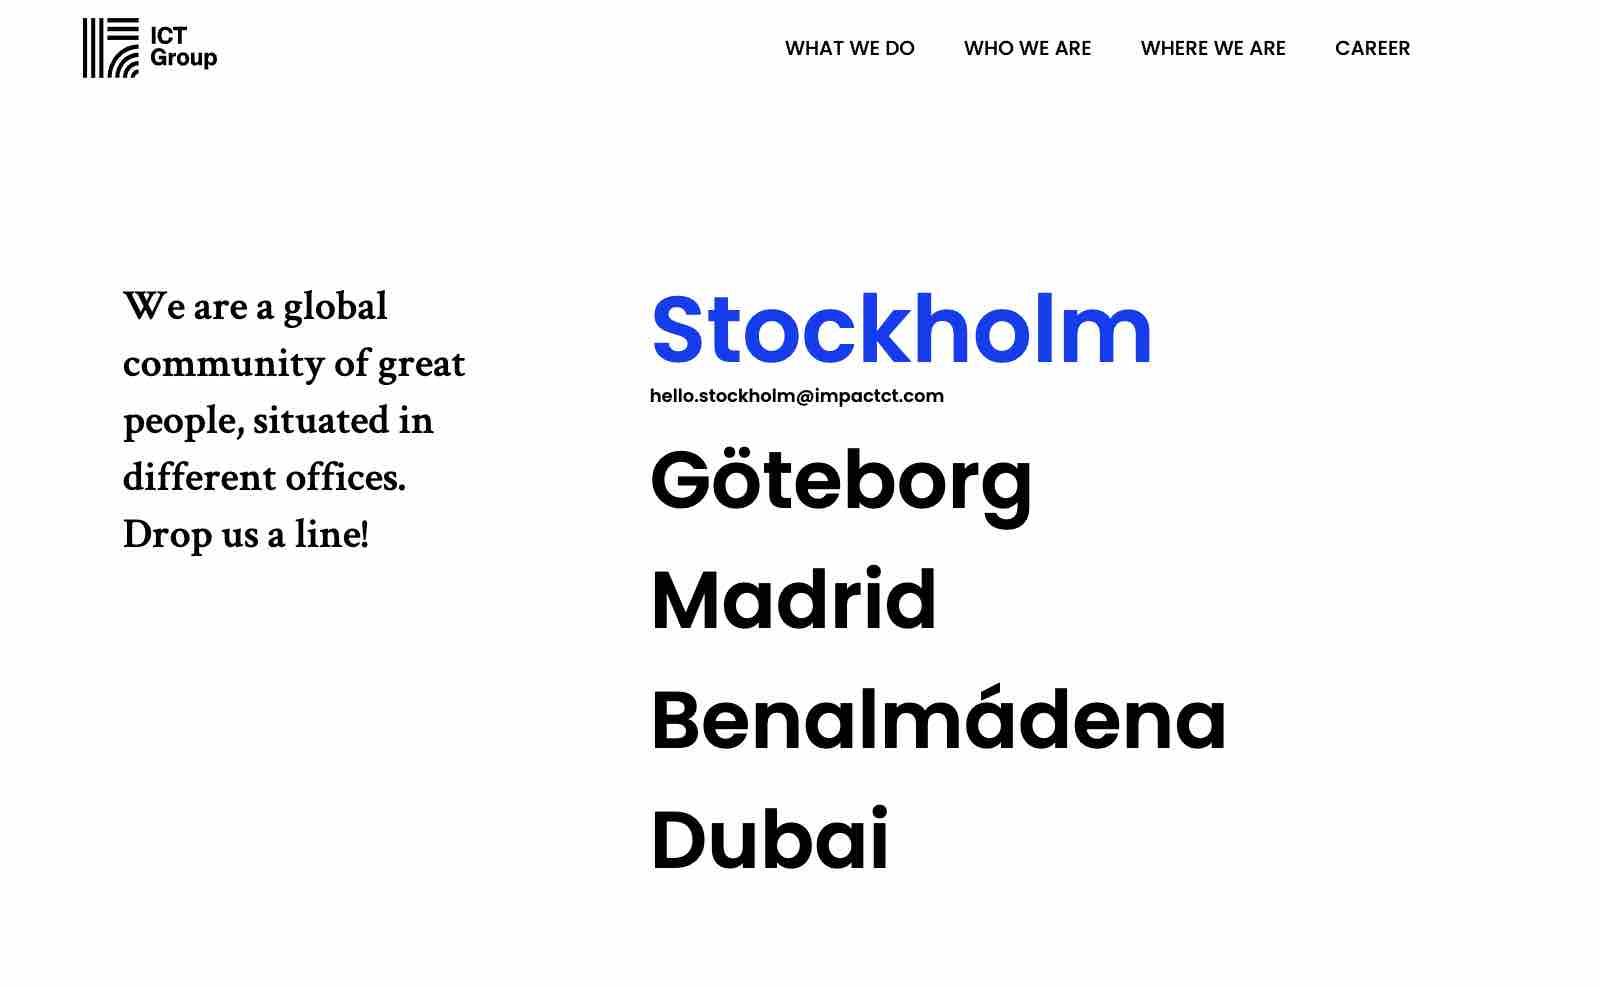 Is crowd1 a scam Impact Crowd Technology website mentions Goteborg, Madrid, Benalmadena and Dubai as office locations